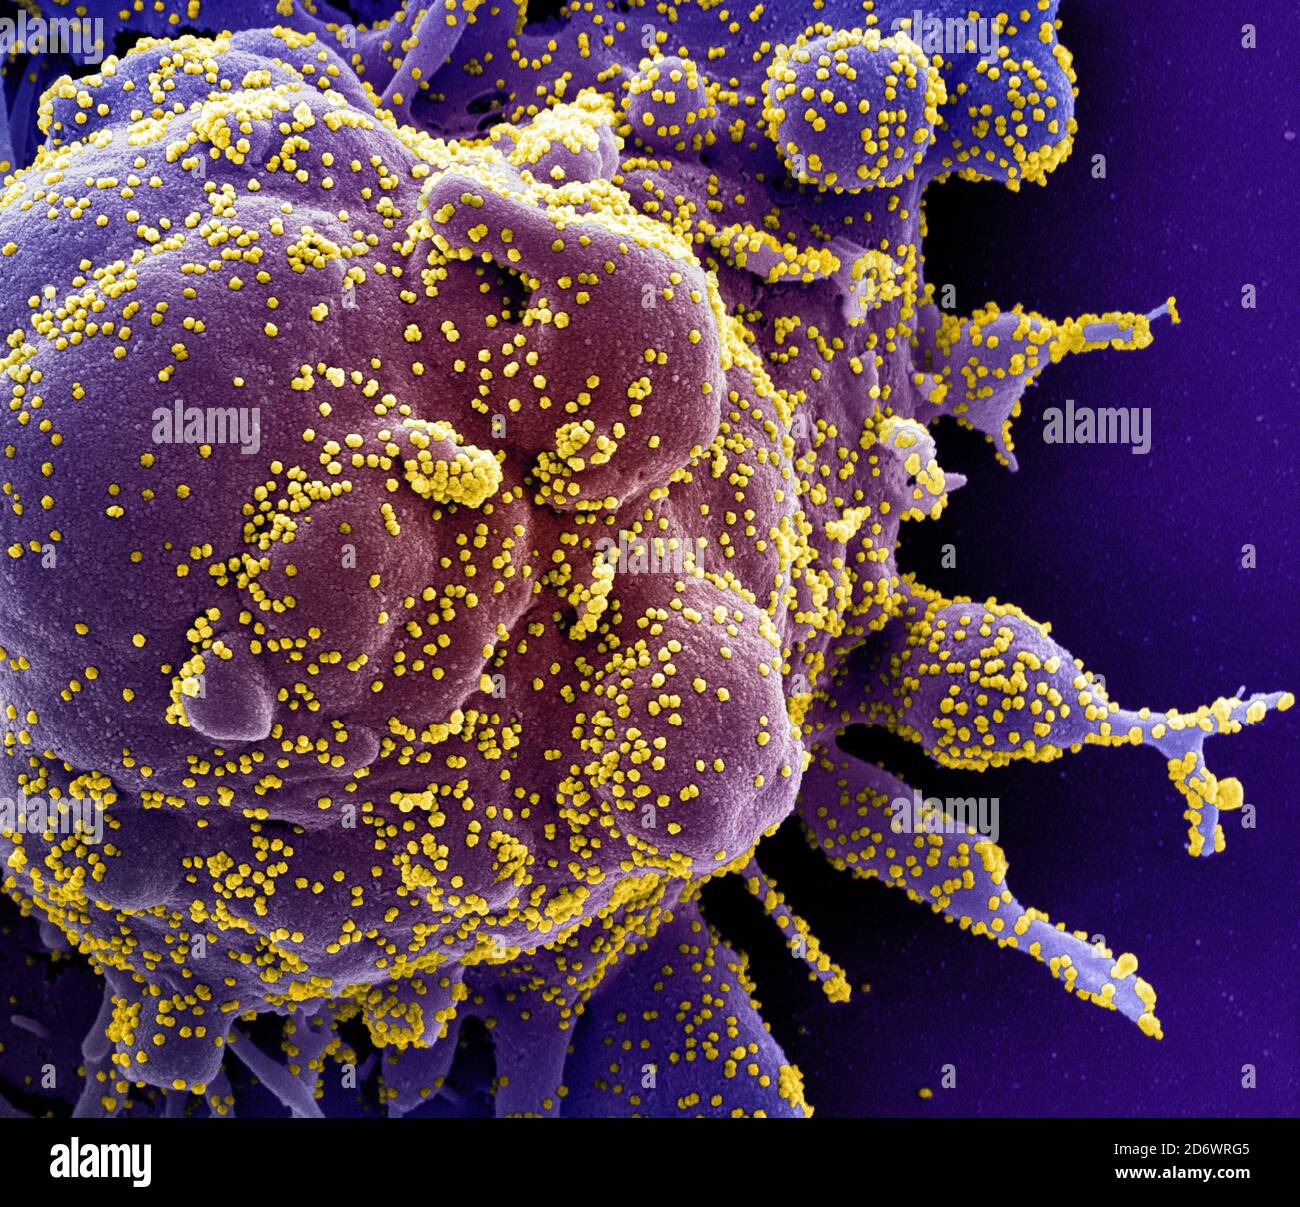 Colorized scanning electron micrograph of an apoptotic cell (purple) heavily infected with SARS-COV-2 virus particles (yellow), isolated from a patien Stock Photo